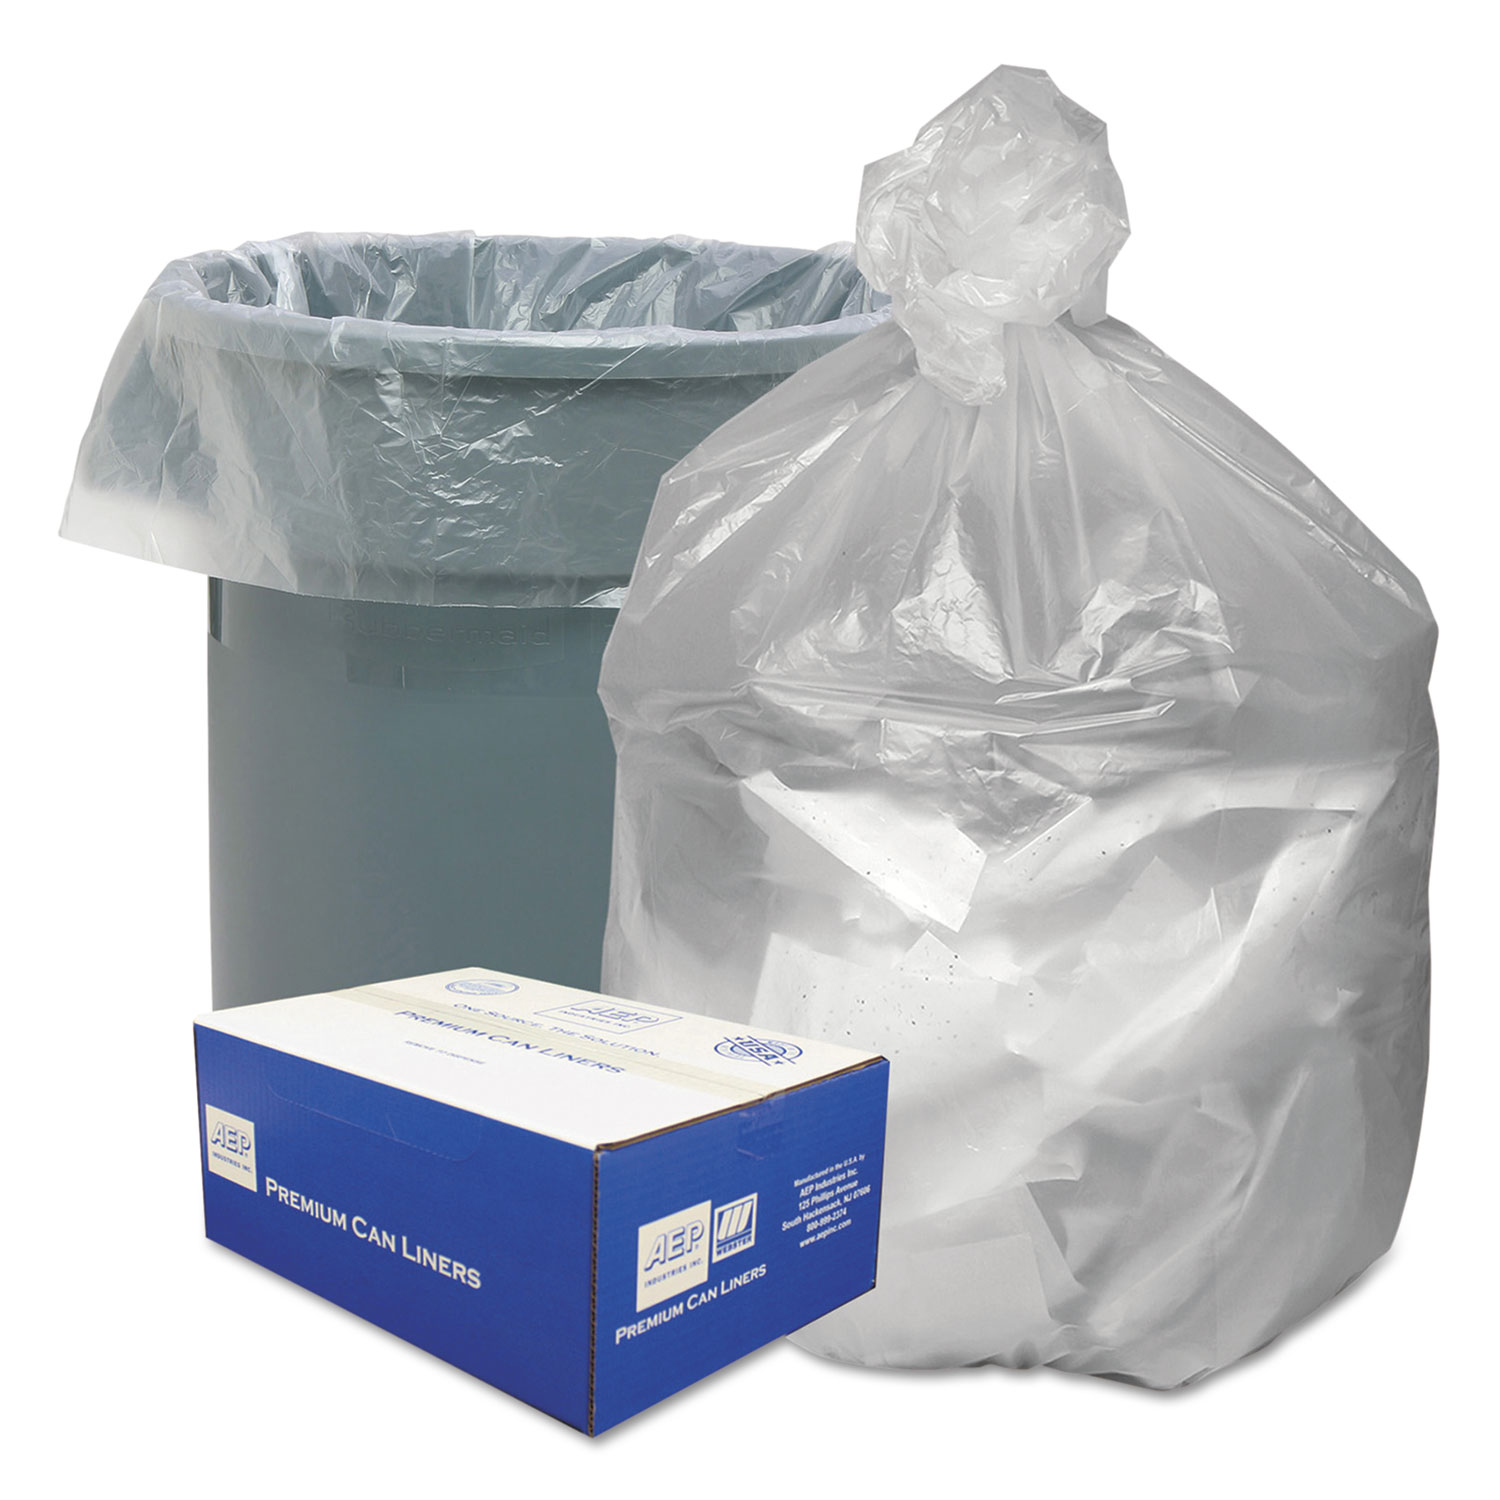  Good 'n Tuff GNT3860 Waste Can Liners, 60 gal, 12 microns, 38 x 58, Natural, 200/Carton (WBIGNT3860) 